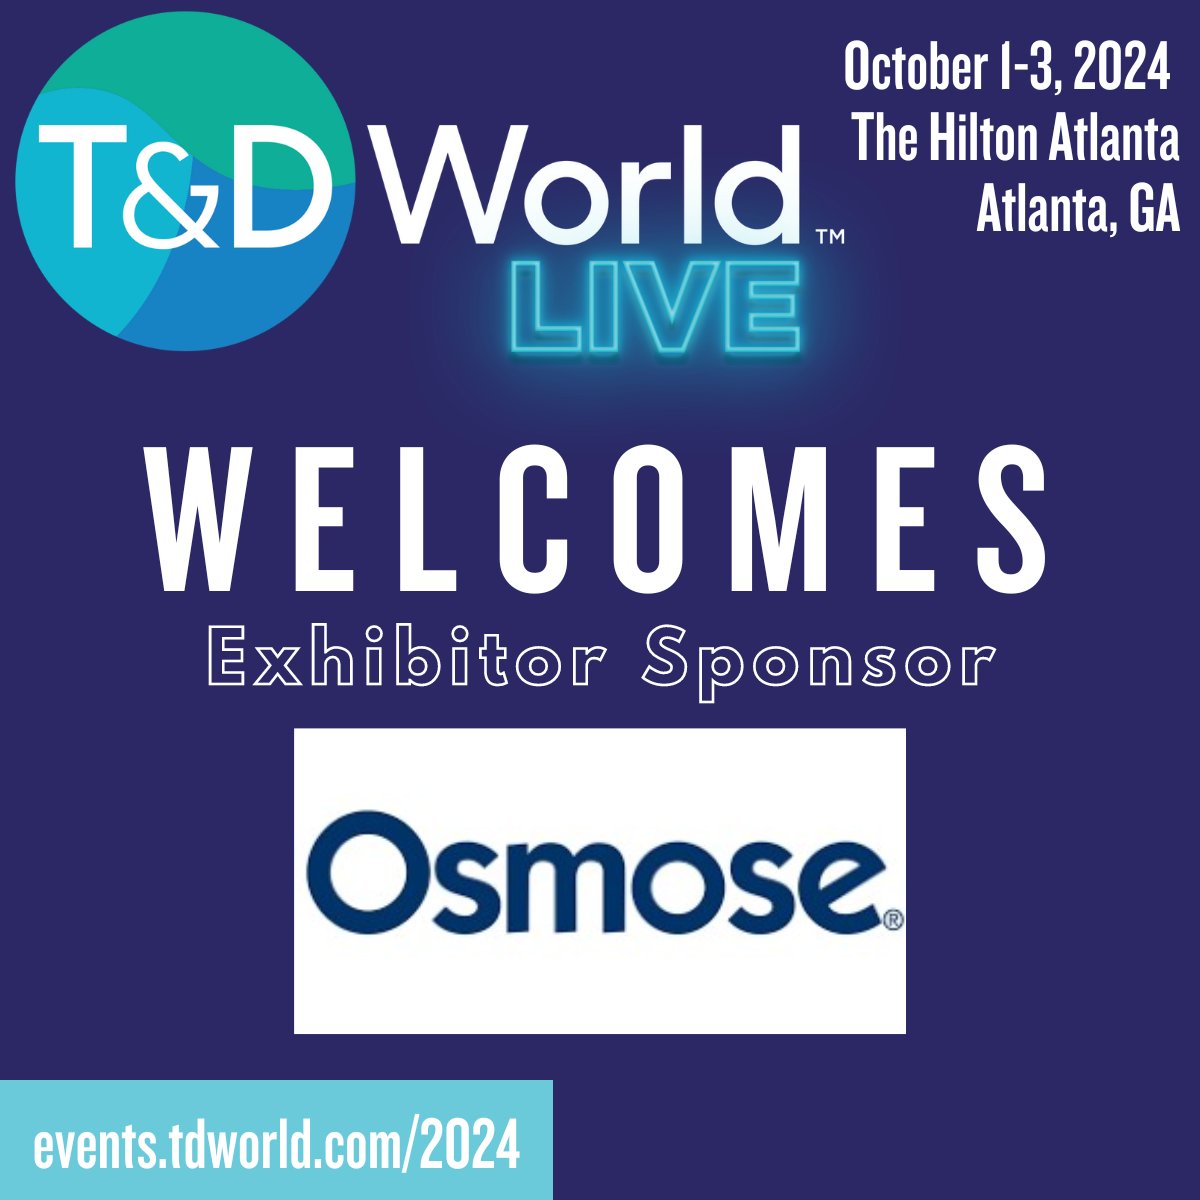 T&D World Live 2024 welcomes exhibitor sponsor: Osmose Utilities Services Inc We thank our sponsors for their contribution to the T&D World Live conference taking place October 1-3, 2024! T&D World Live, the leading media resource in Transmission and Distribution! Join us!